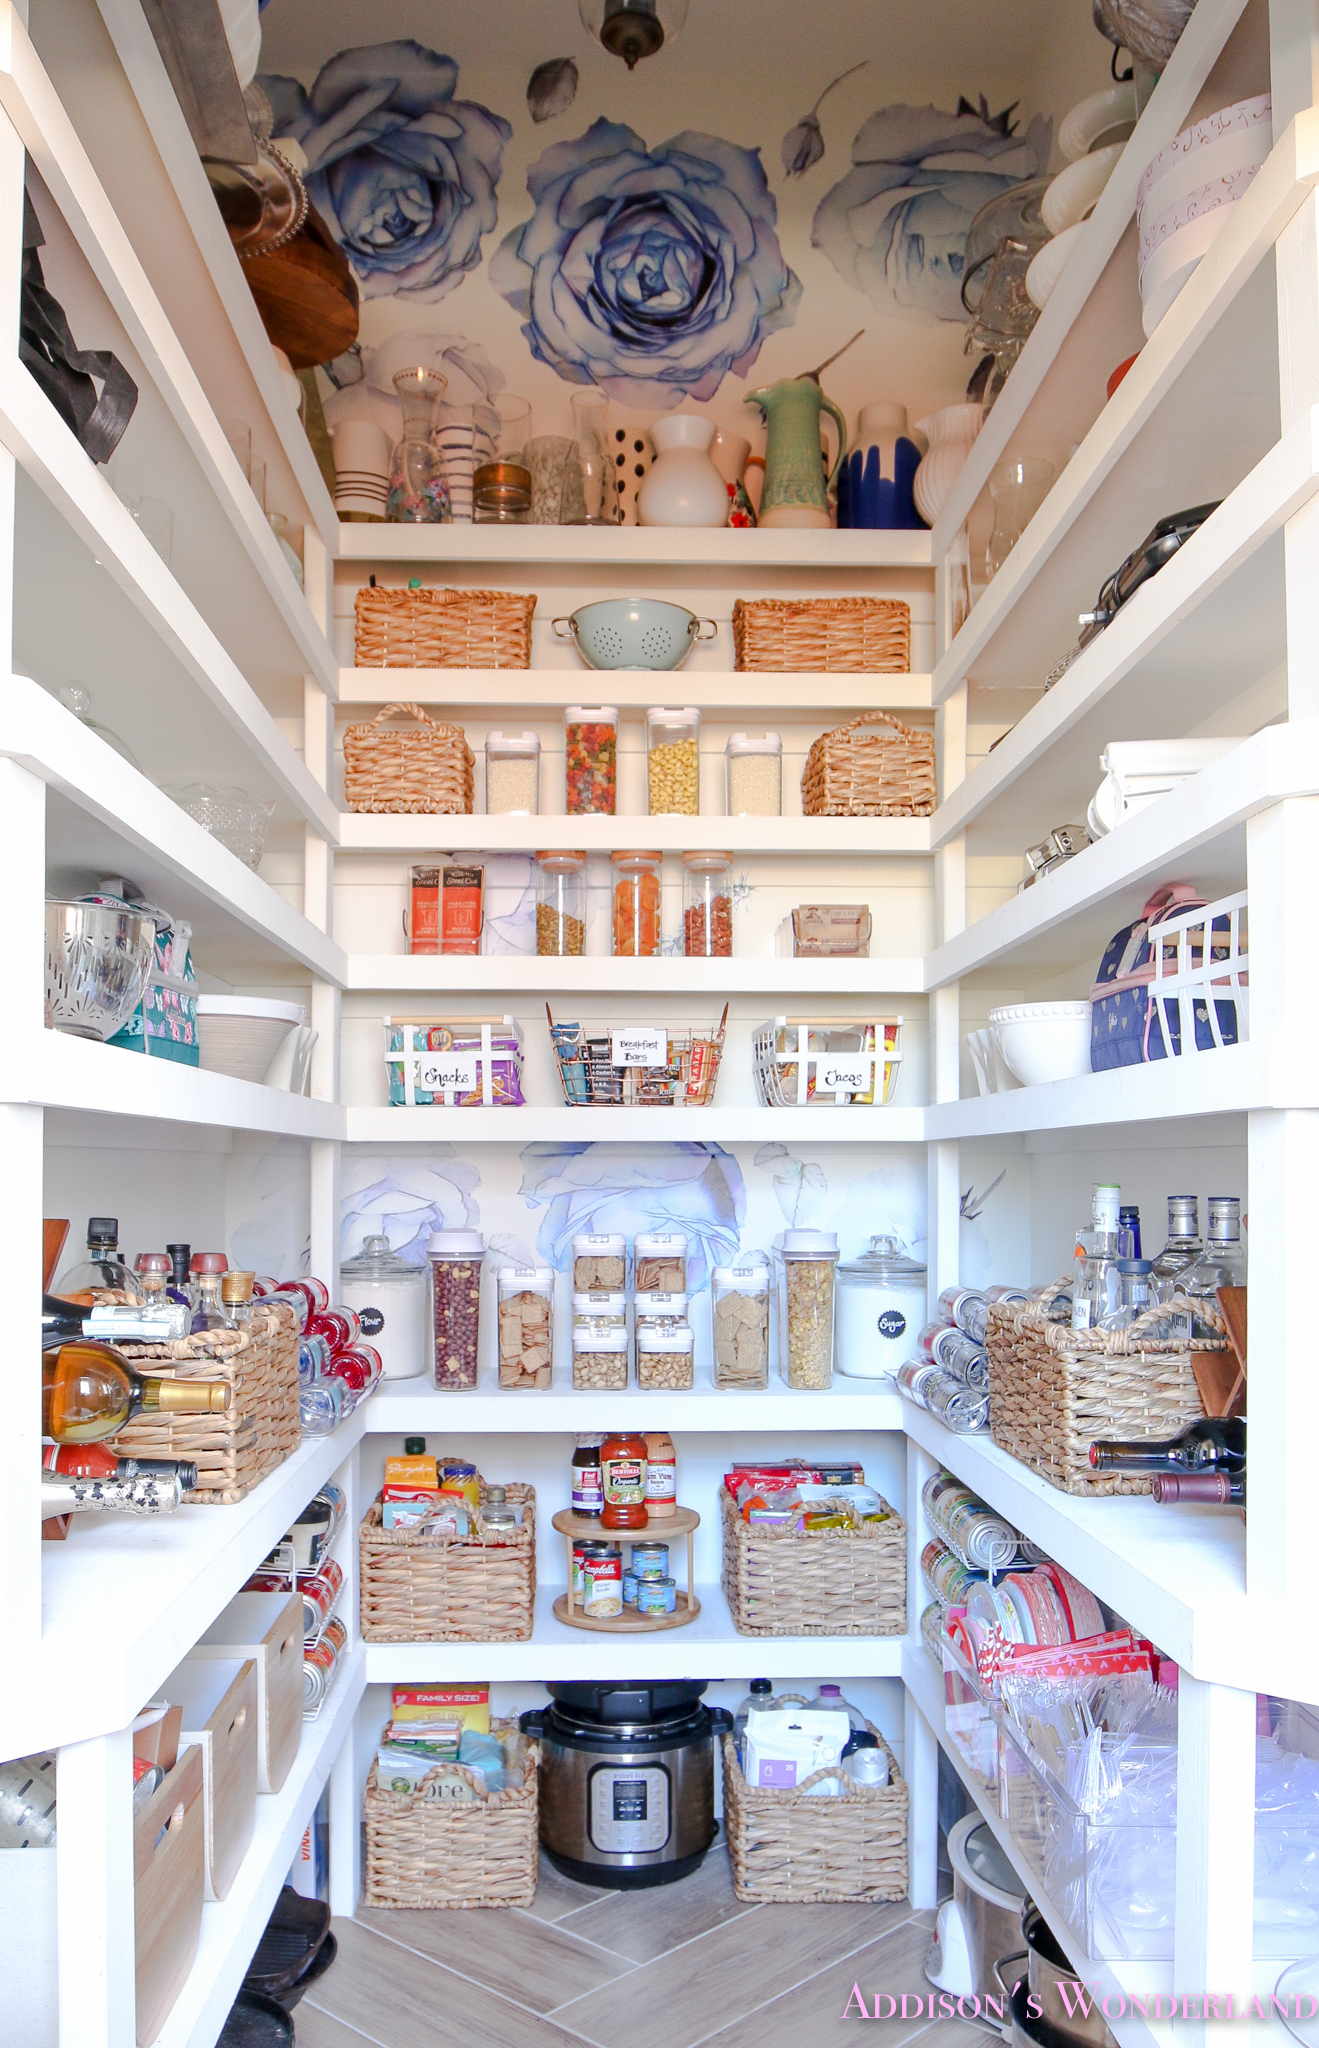 Pantry Organization Ideas from Our Colorful New Pantry! Addison's